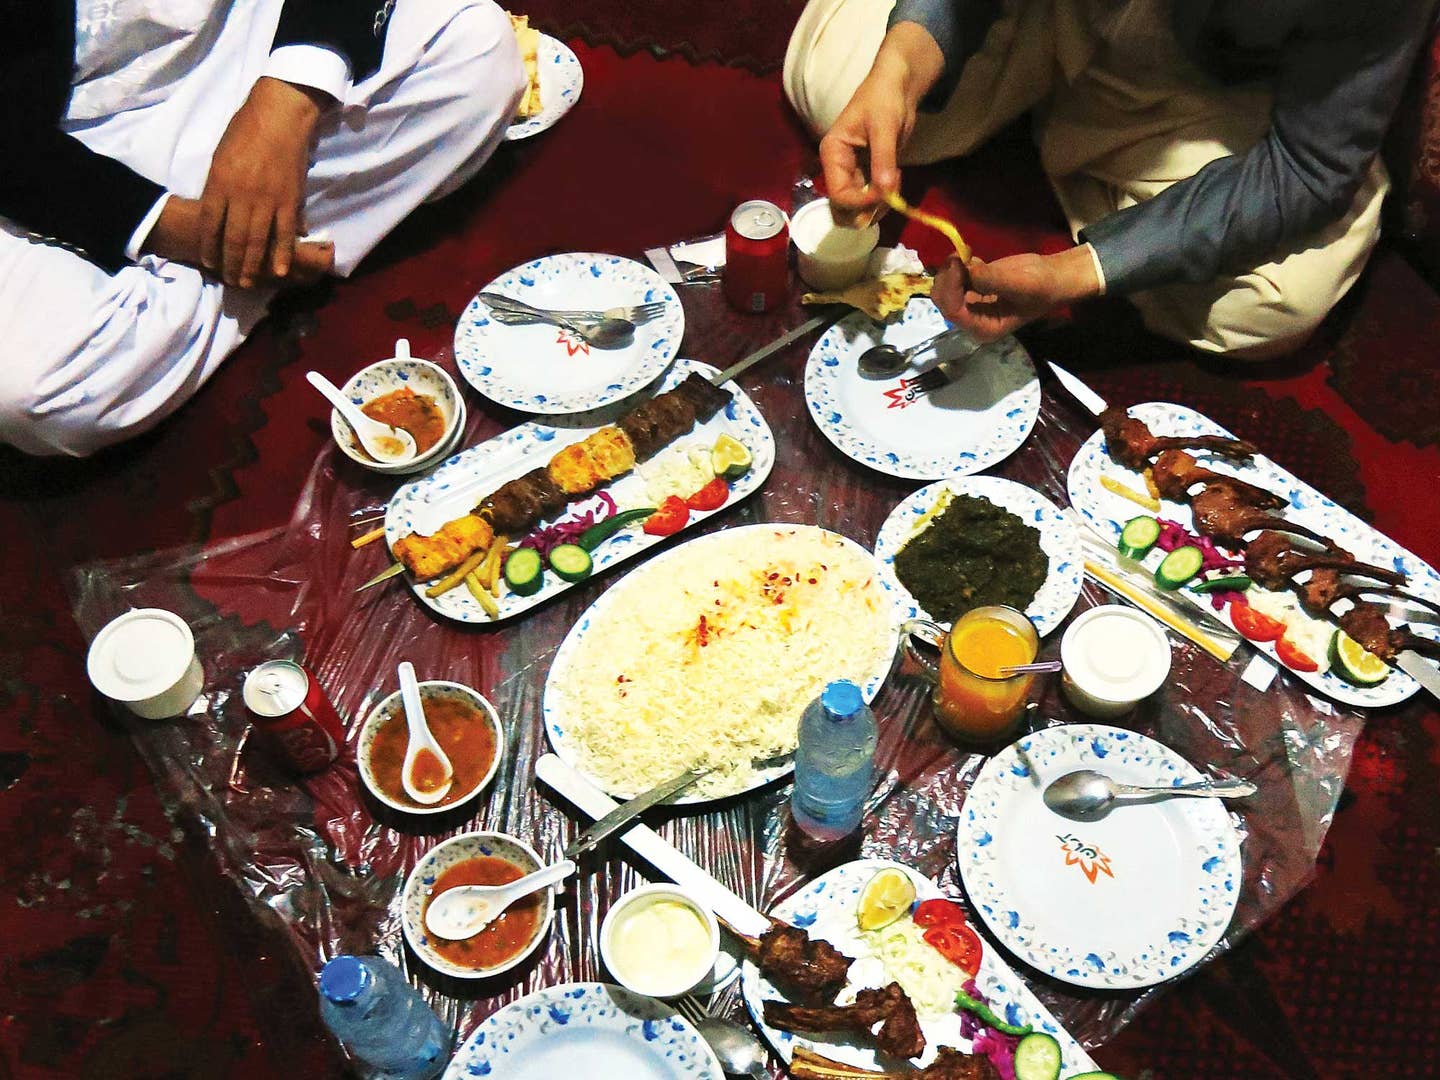 A Different Kind of Fast Food in Afghanistan